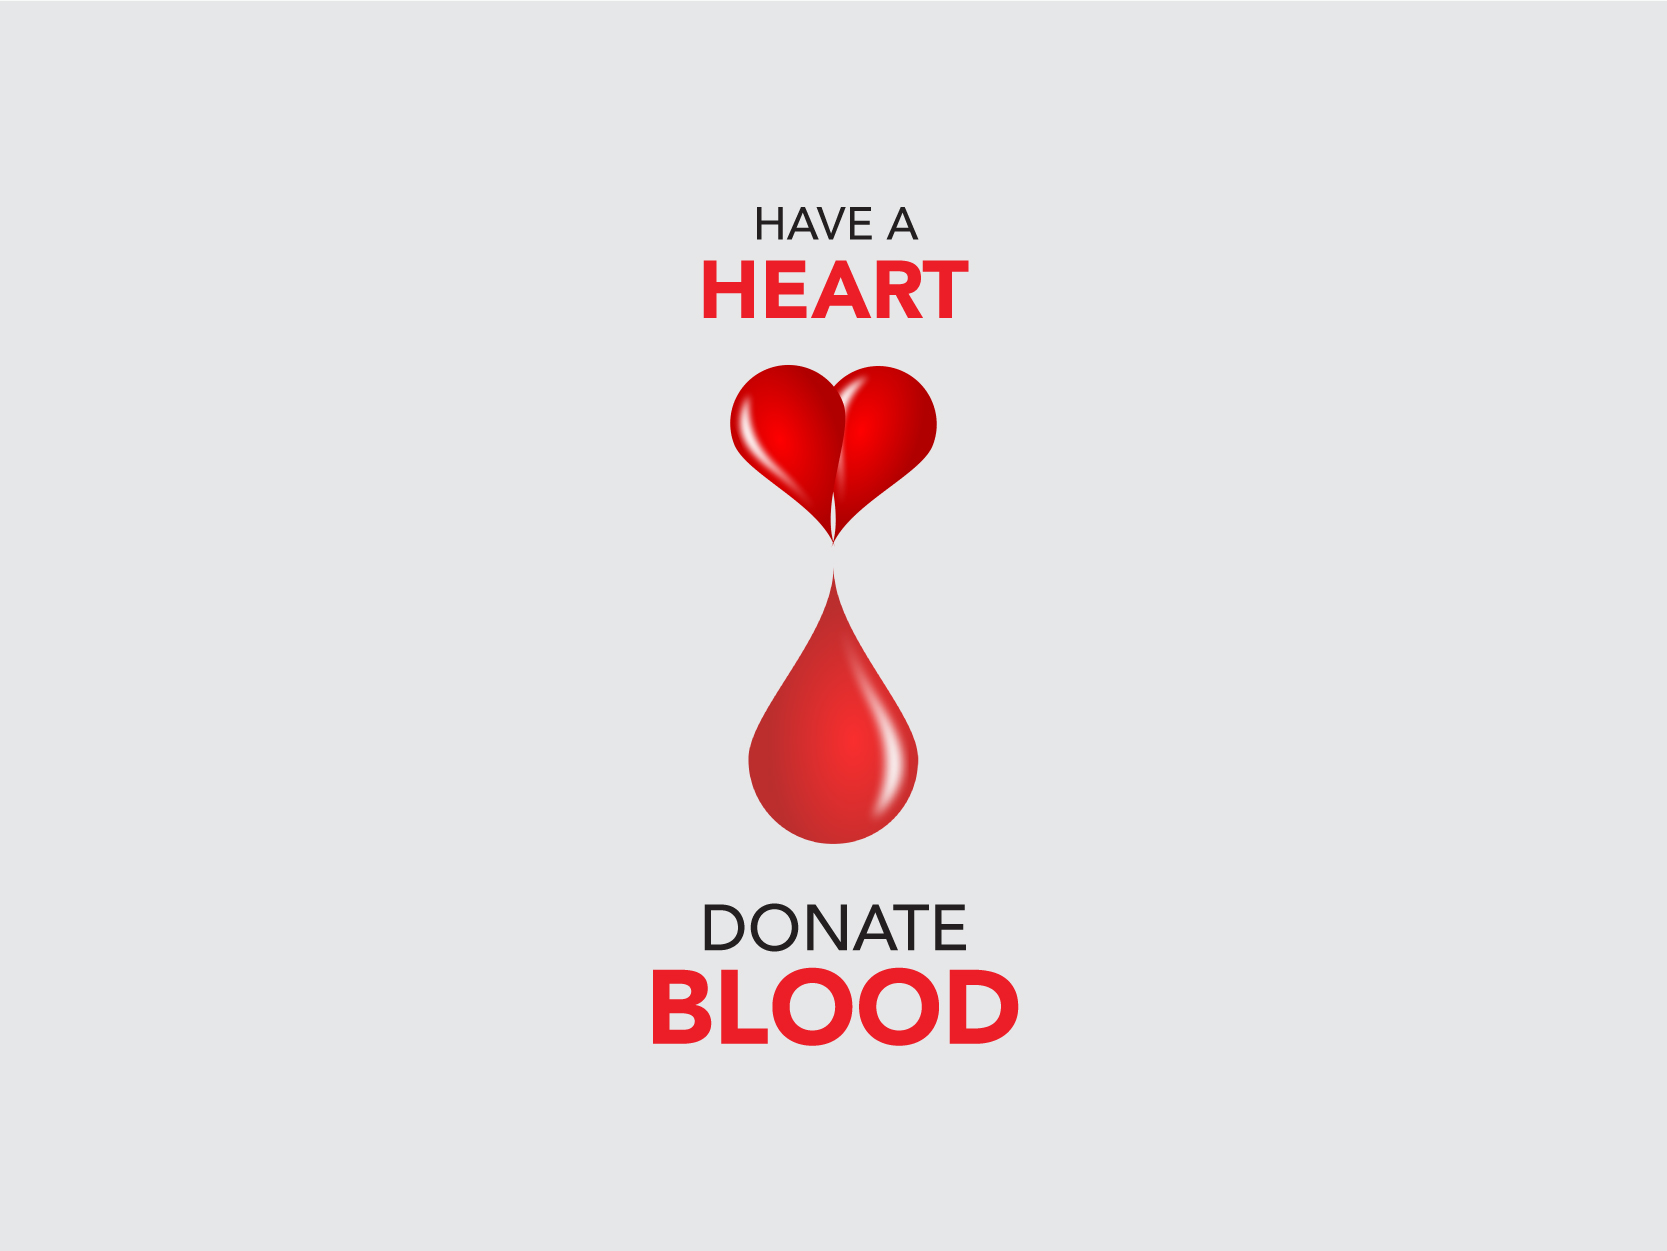 A red heart above a drop of blood with the words "Have a heart, donate blood."